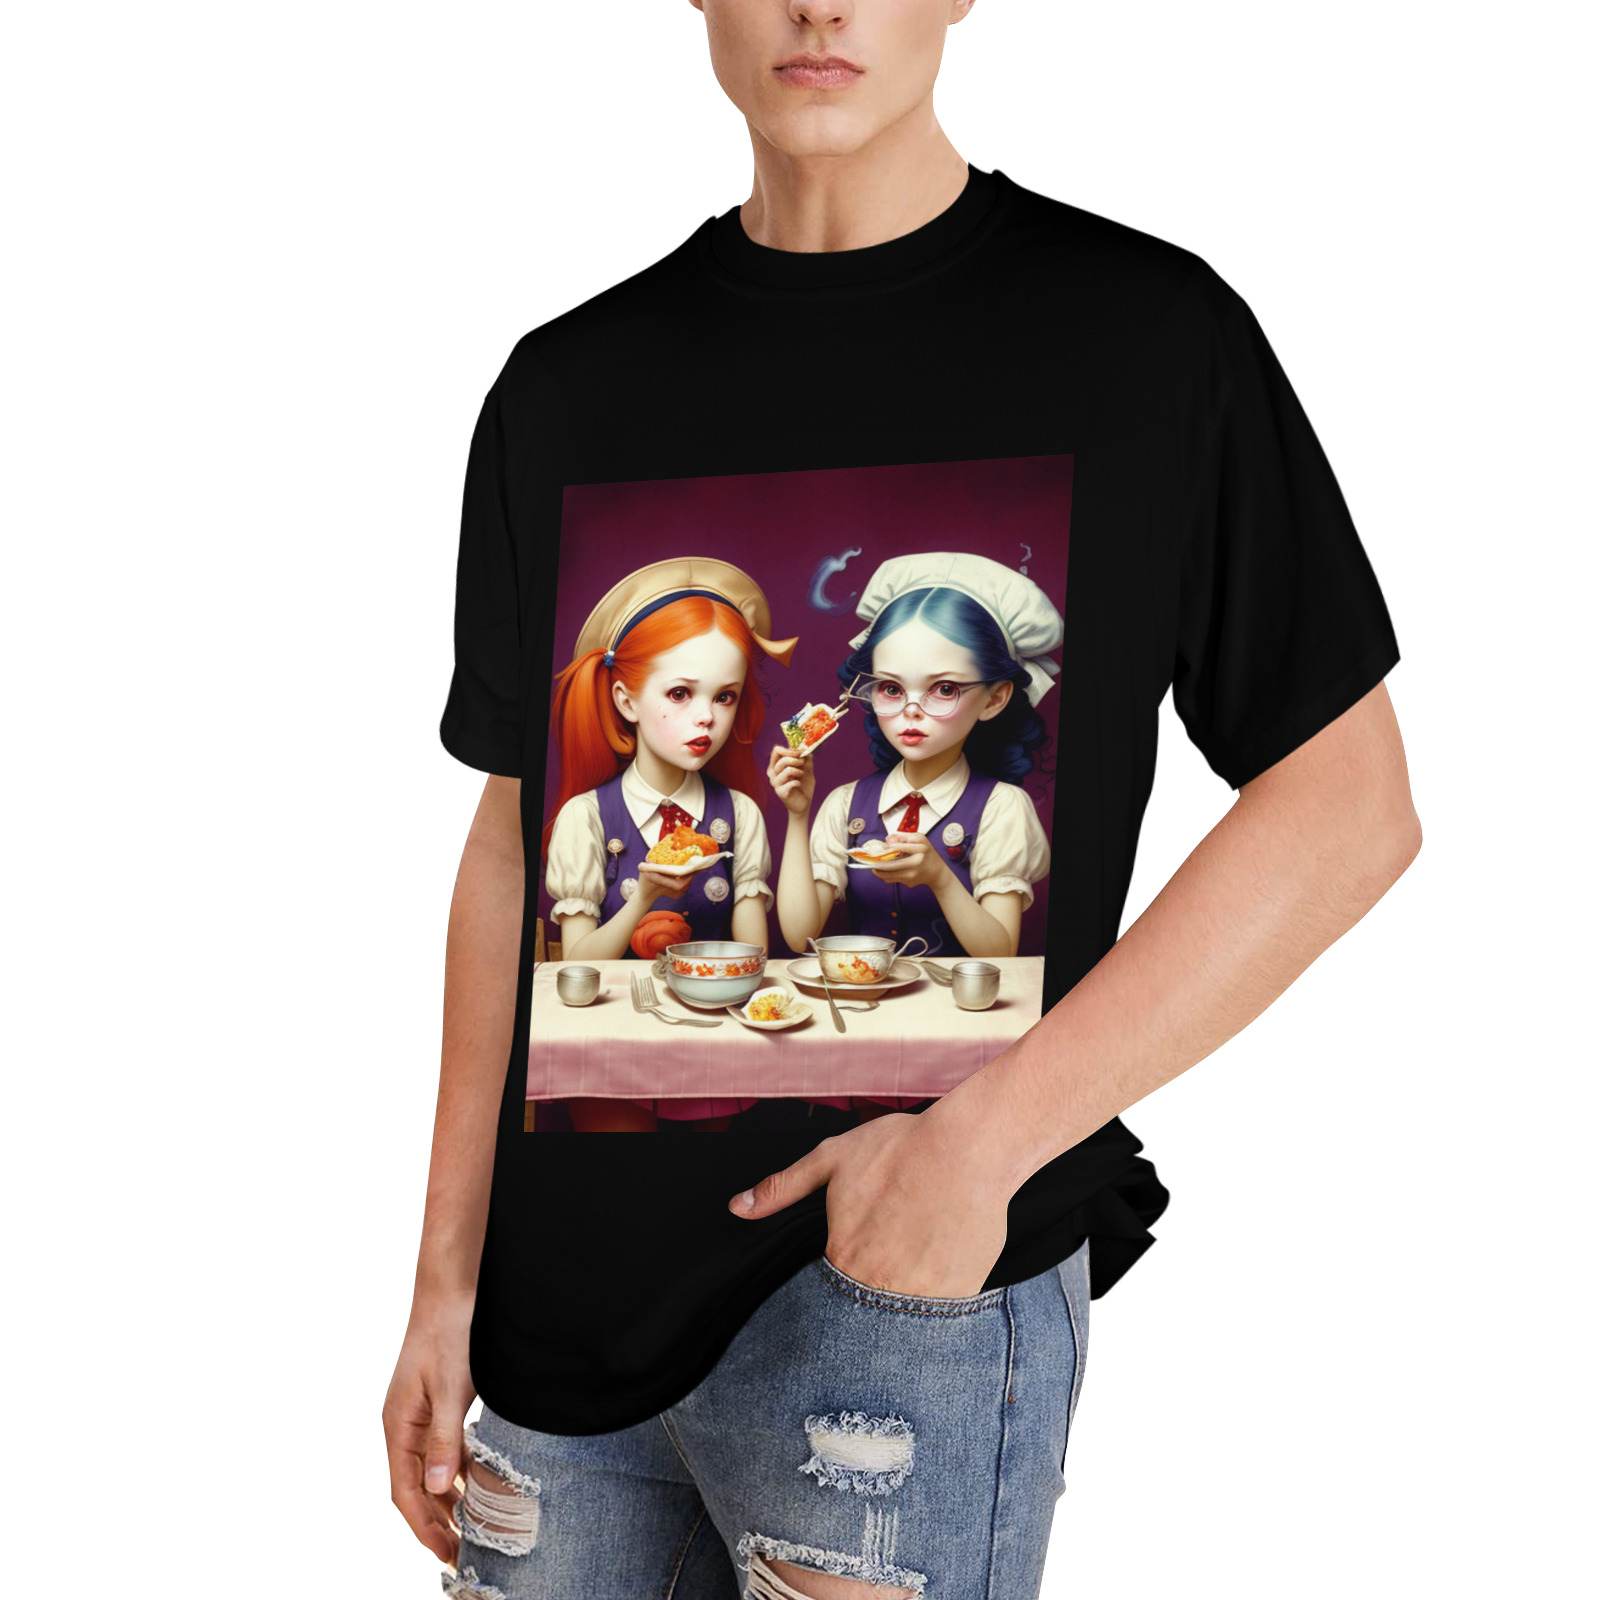 adorable girls eating lunch 8 Men's Glow in the Dark T-shirt (Front Printing)